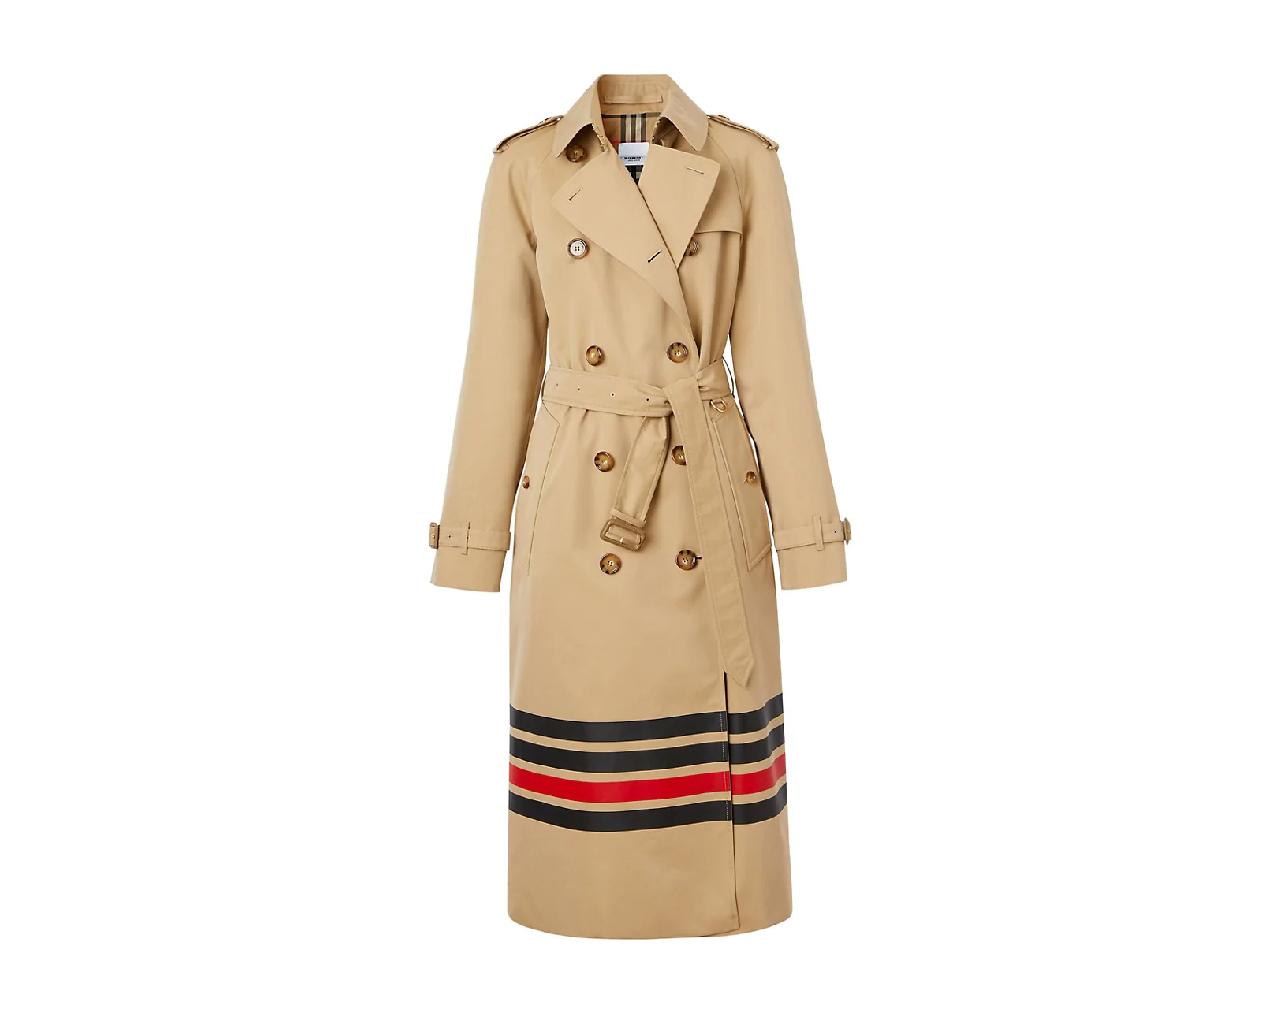 Saks Fifth Avenue Burberry Jacket Cheapest Price, 50% OFF |  deliciousgreek.ca